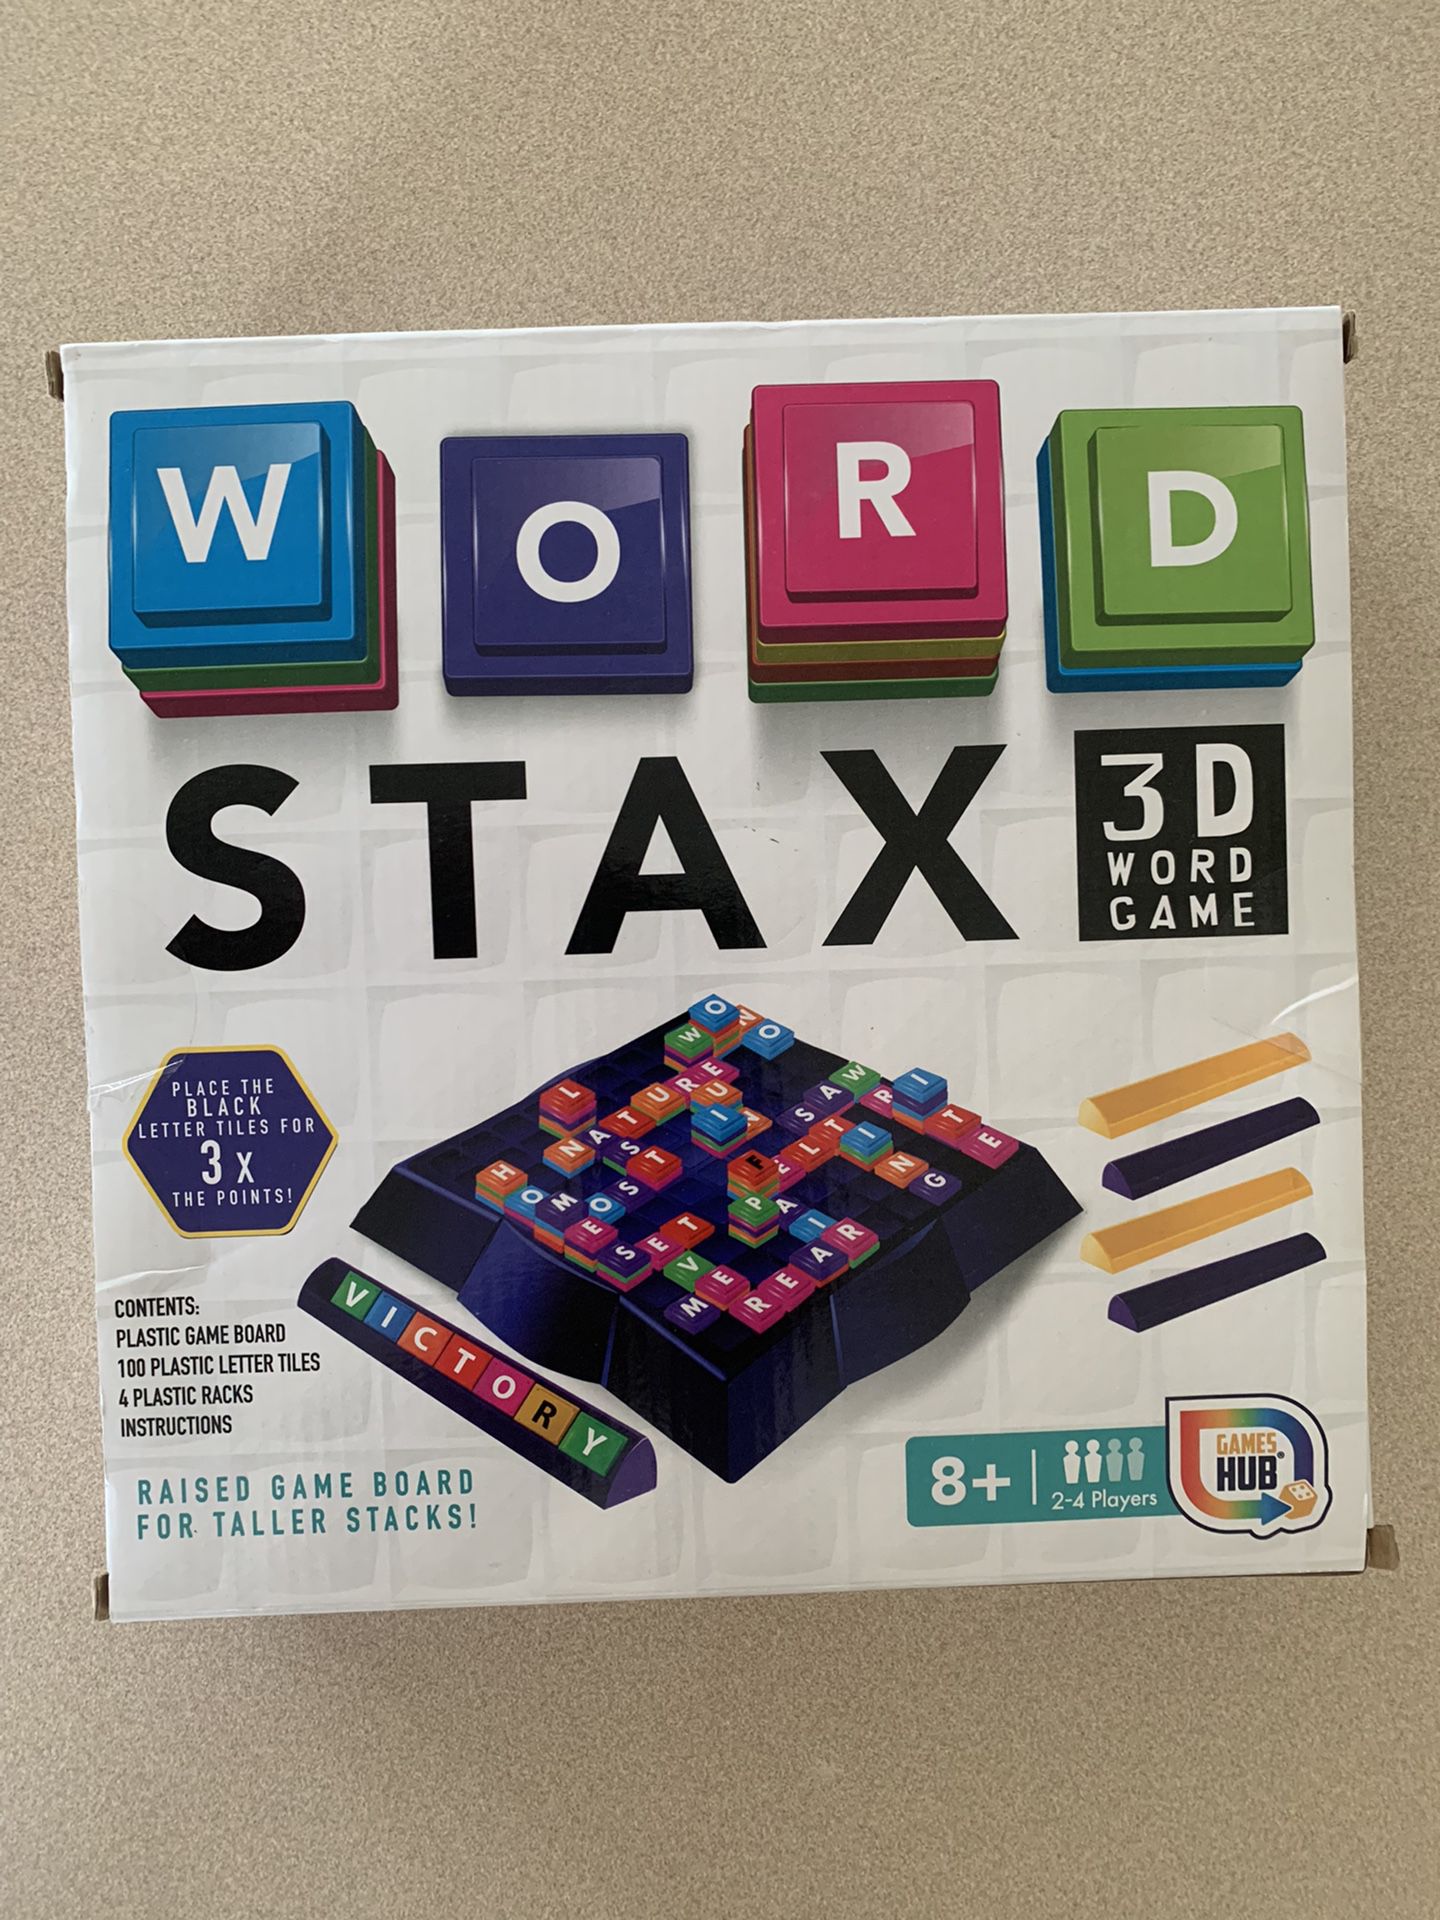 WORD STAX 3 D WORD GAME 